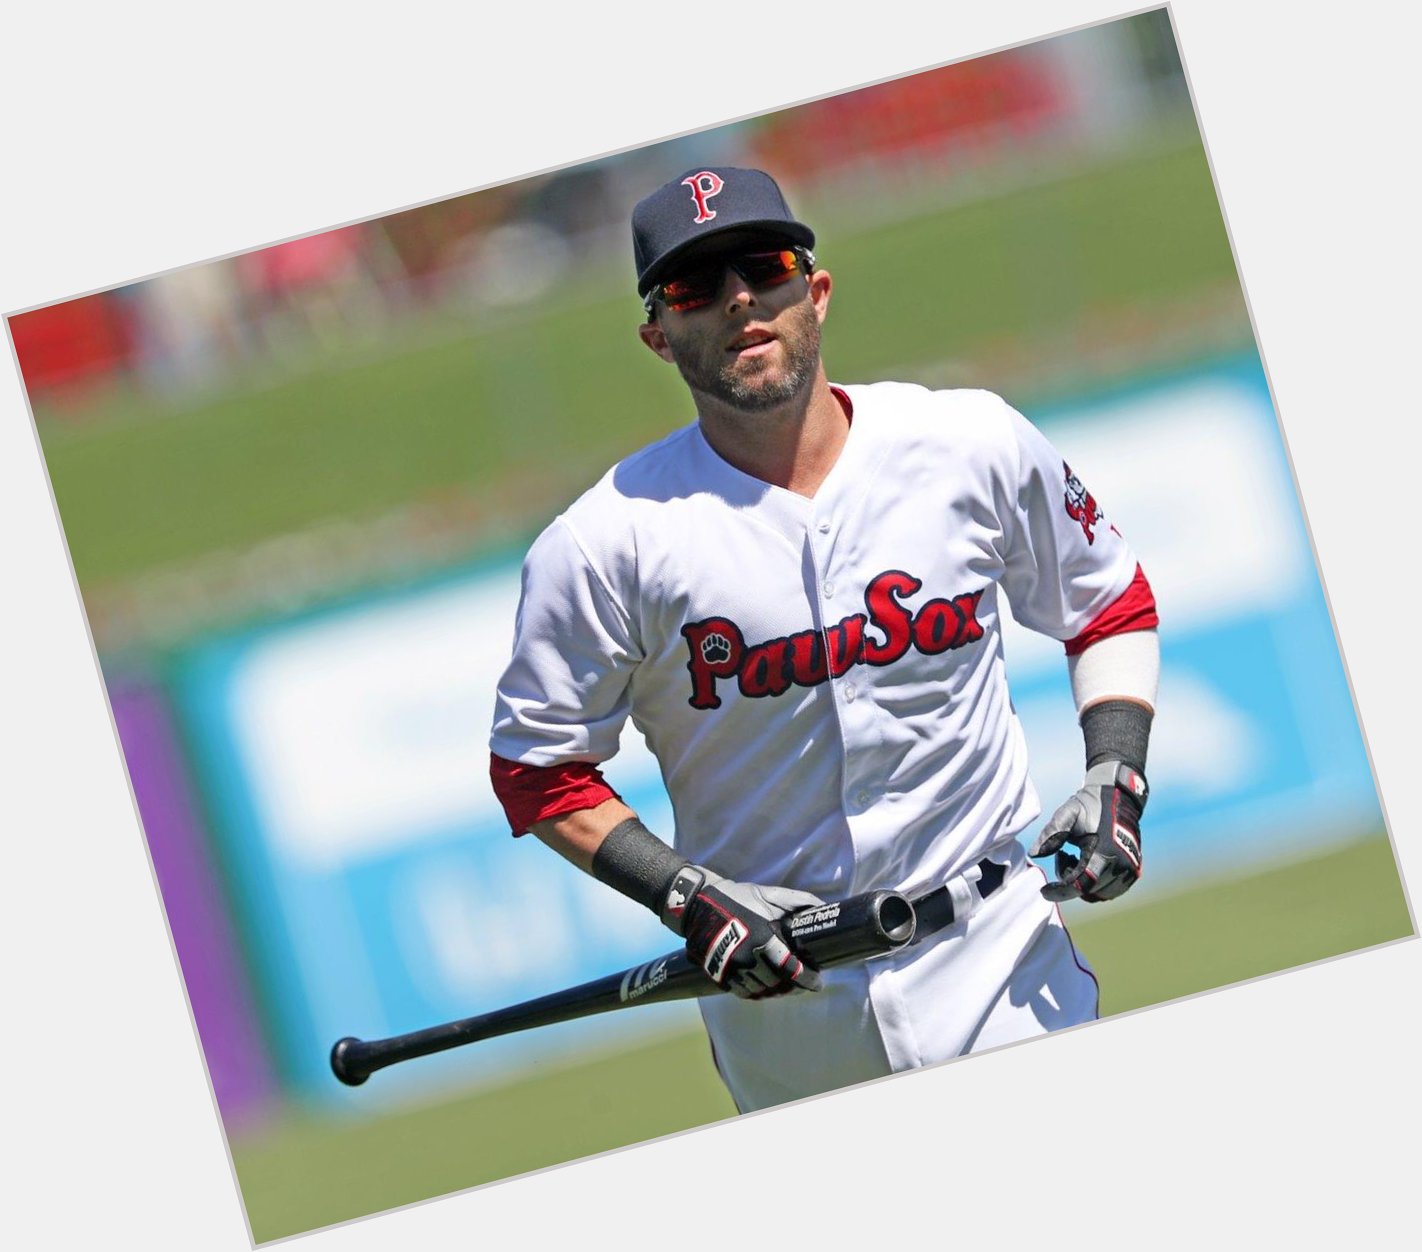 Help us wish Dustin Pedroia a Happy Birthday! The former American League MVP spent time rehabbing with us in May. 